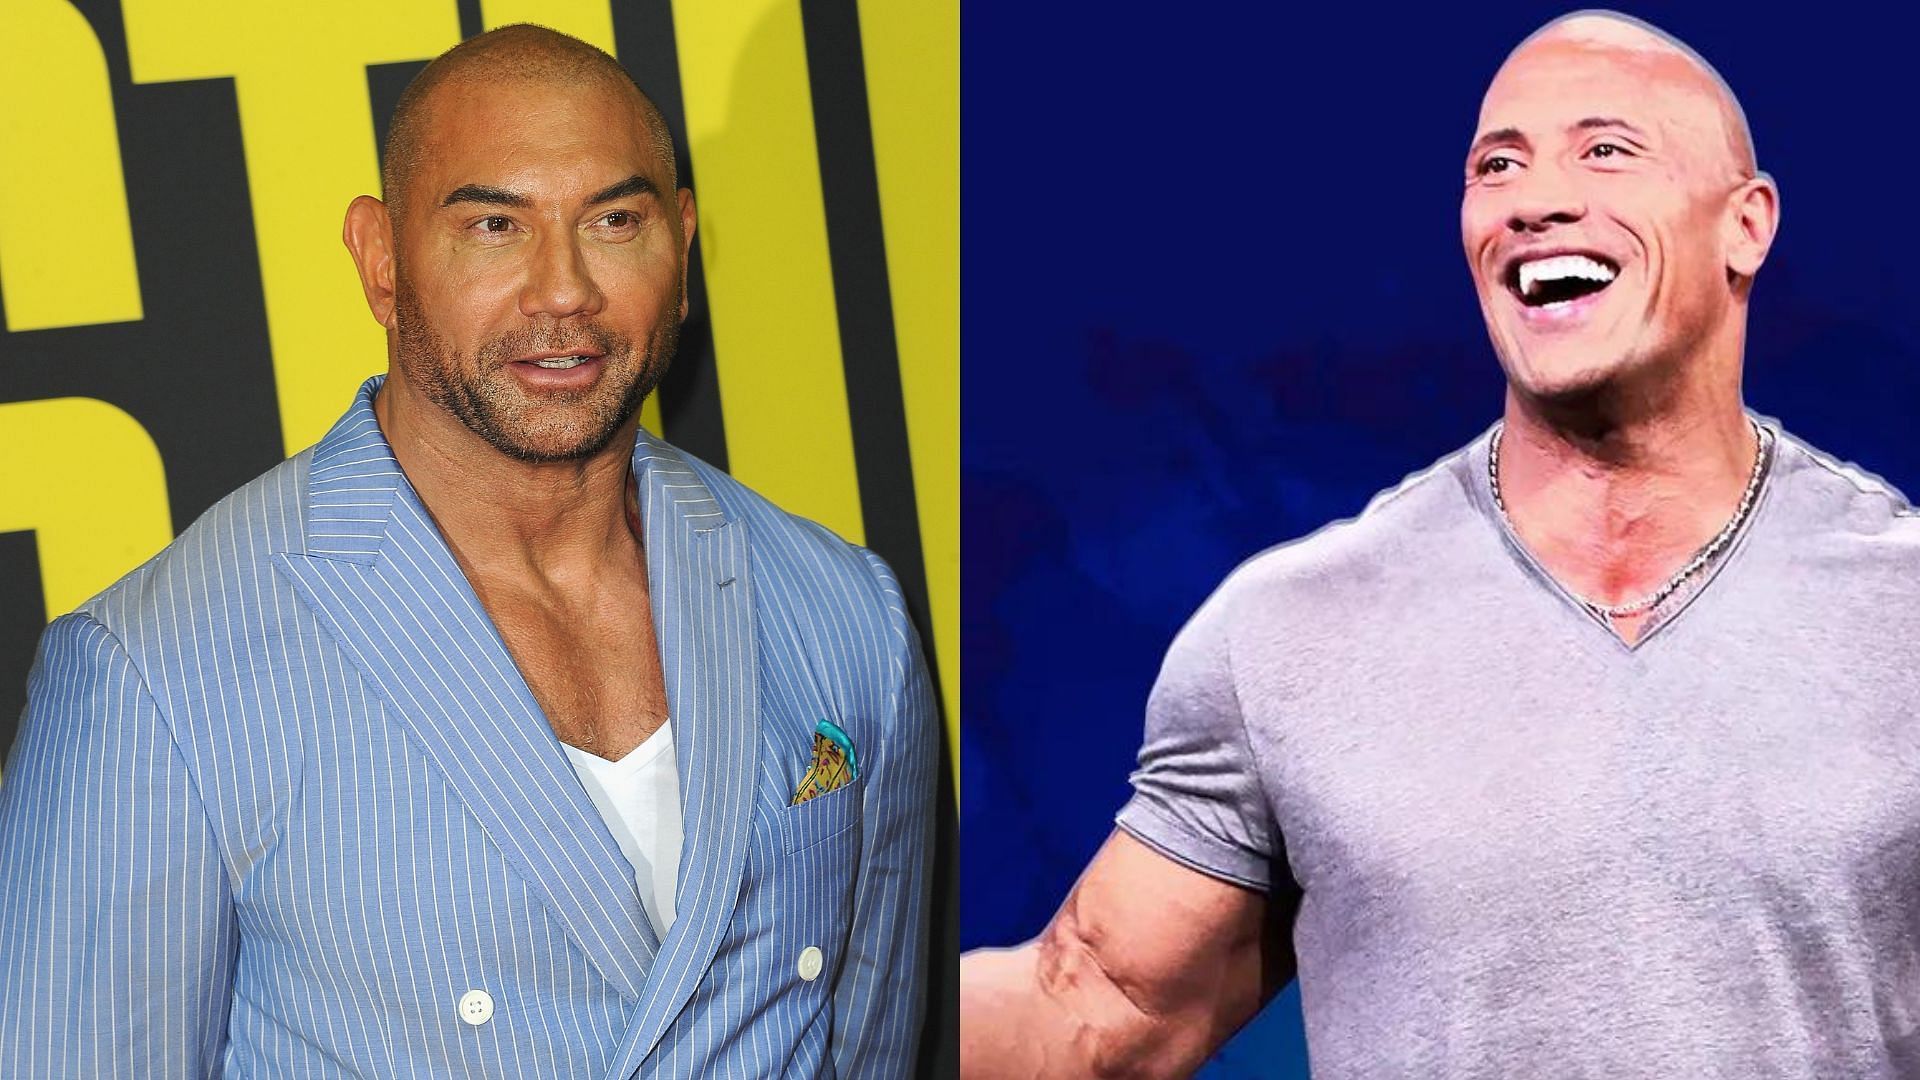 Army of the Dead star Dave Bautista to lead new sci-fi adventure movie  Universe's Most Wanted